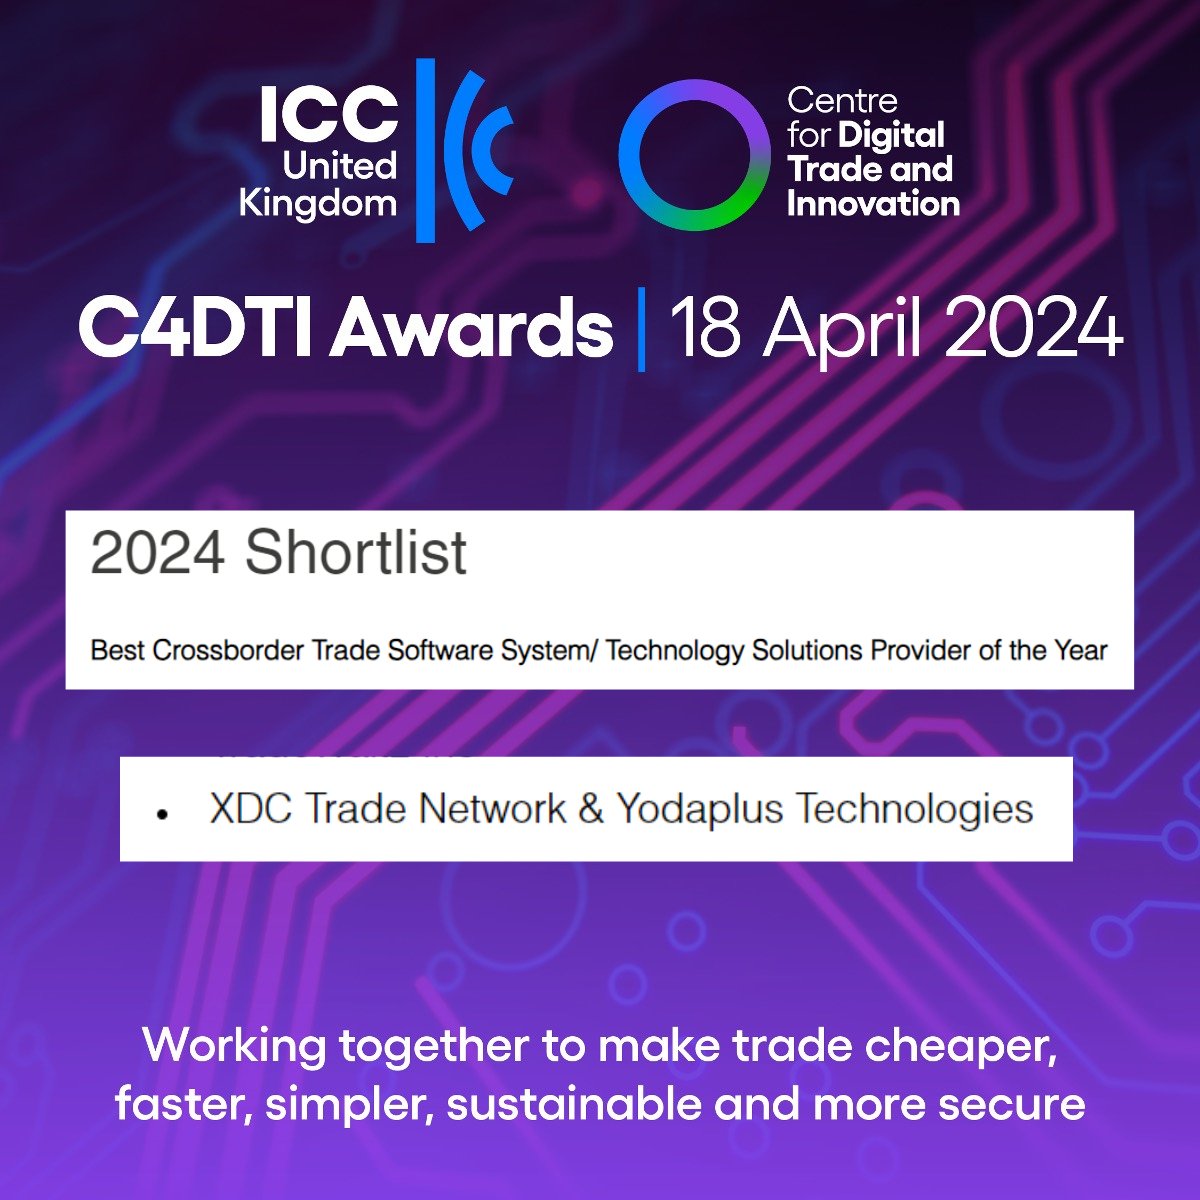 XDC Trade Network, in collaboration with Yodaplus, is shortlisted for the 'Best Crossborder Trade Software System/Technology Solutions Provider of the Year' at the 2nd Annual #C4DTI Digital Trade Awards! For more info. on event: c4dti.co.uk/digital-trade-… #C4DTIAwards #digitaltrade